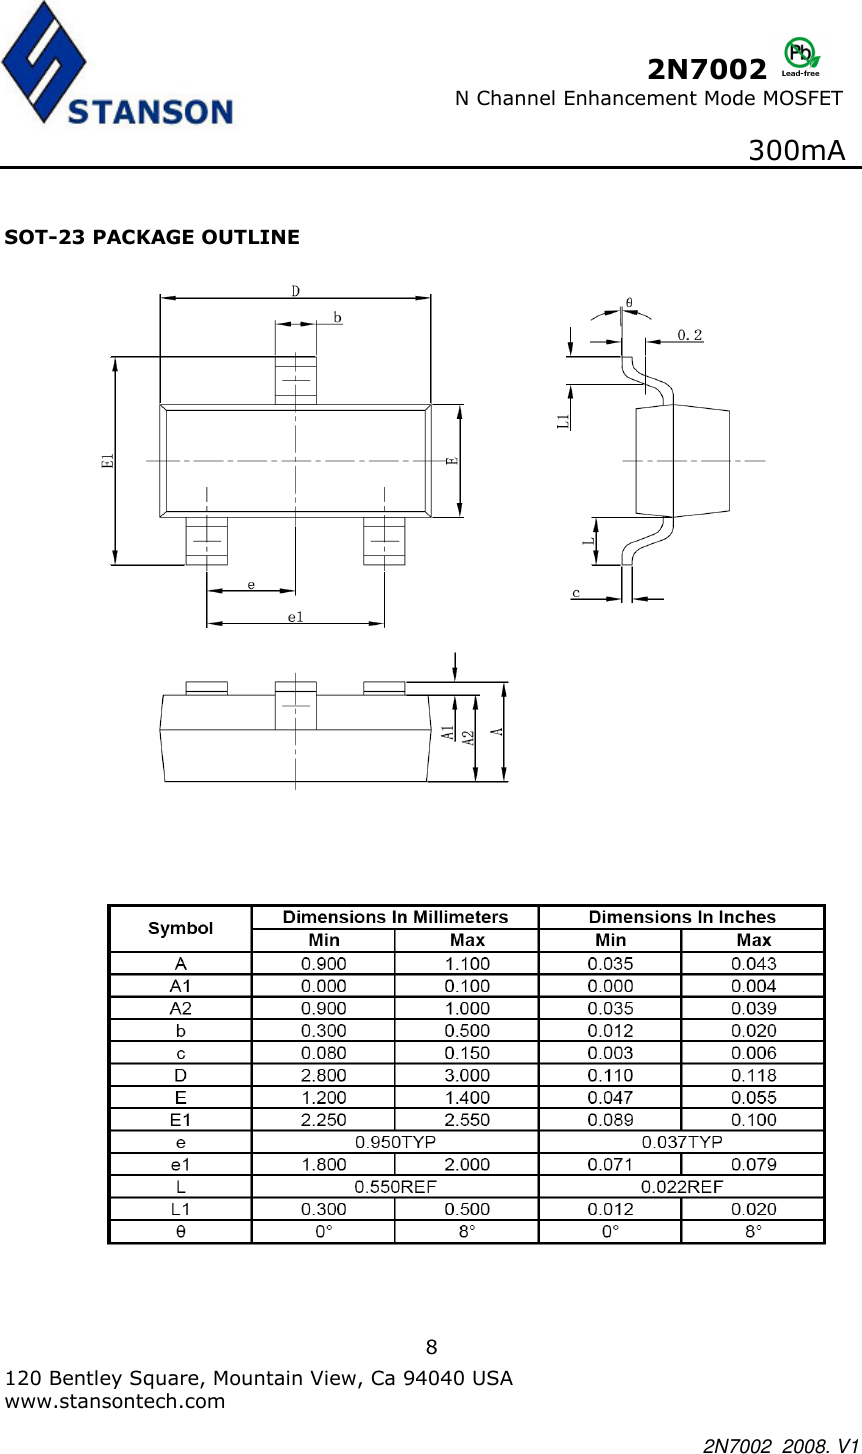 Page 8 of 9 - 2N7002 - Datasheet. Www.s-manuals.com. Stanson